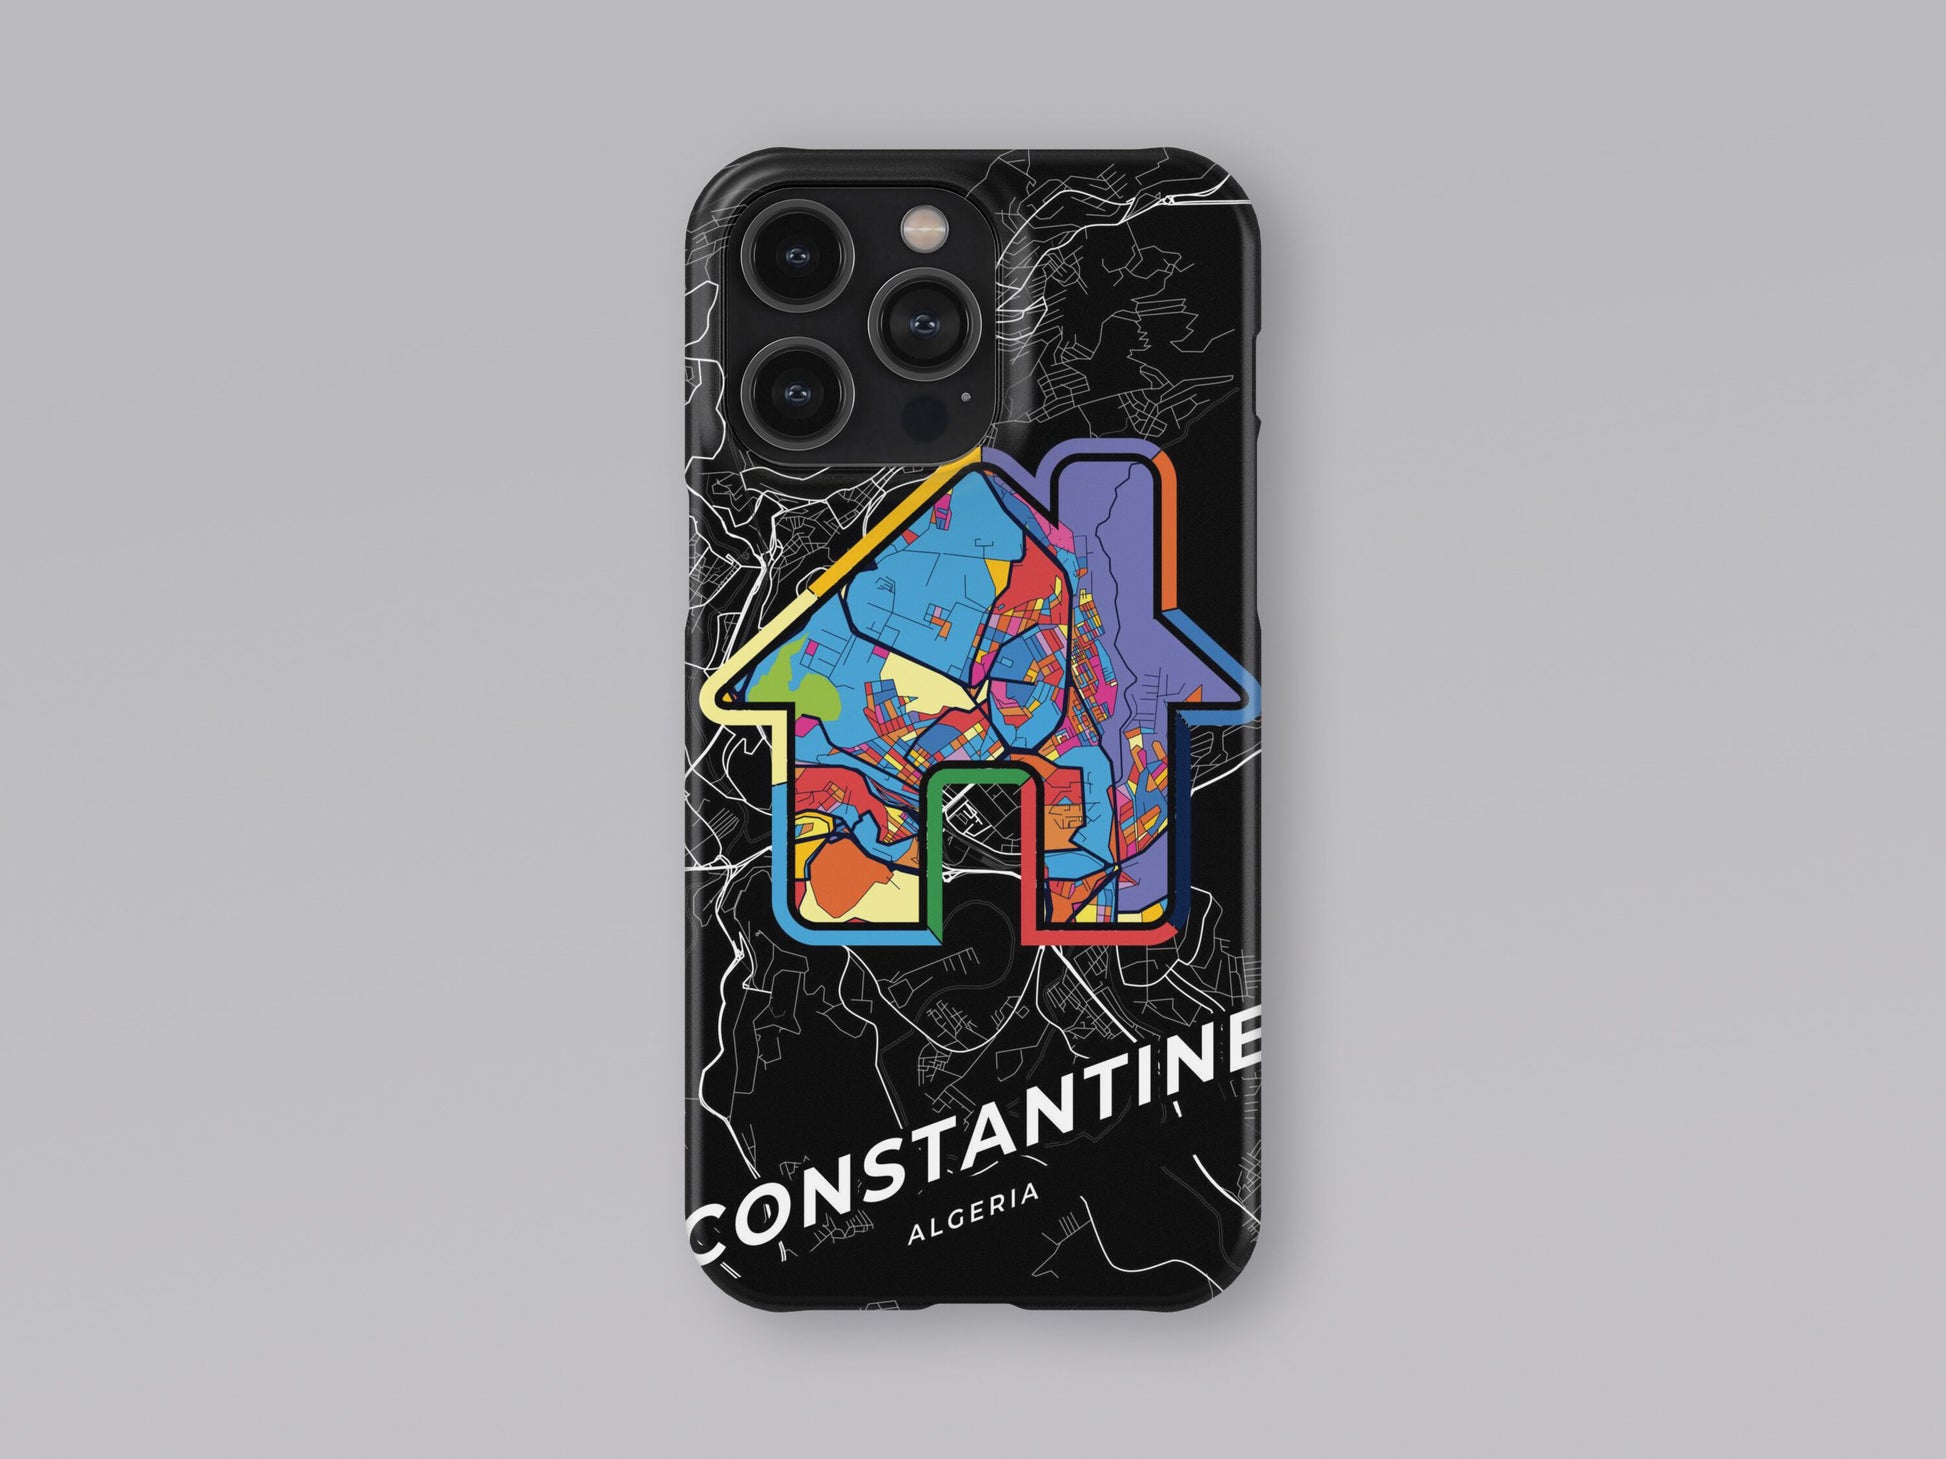 Constantine Algeria slim phone case with colorful icon. Birthday, wedding or housewarming gift. Couple match cases. 3